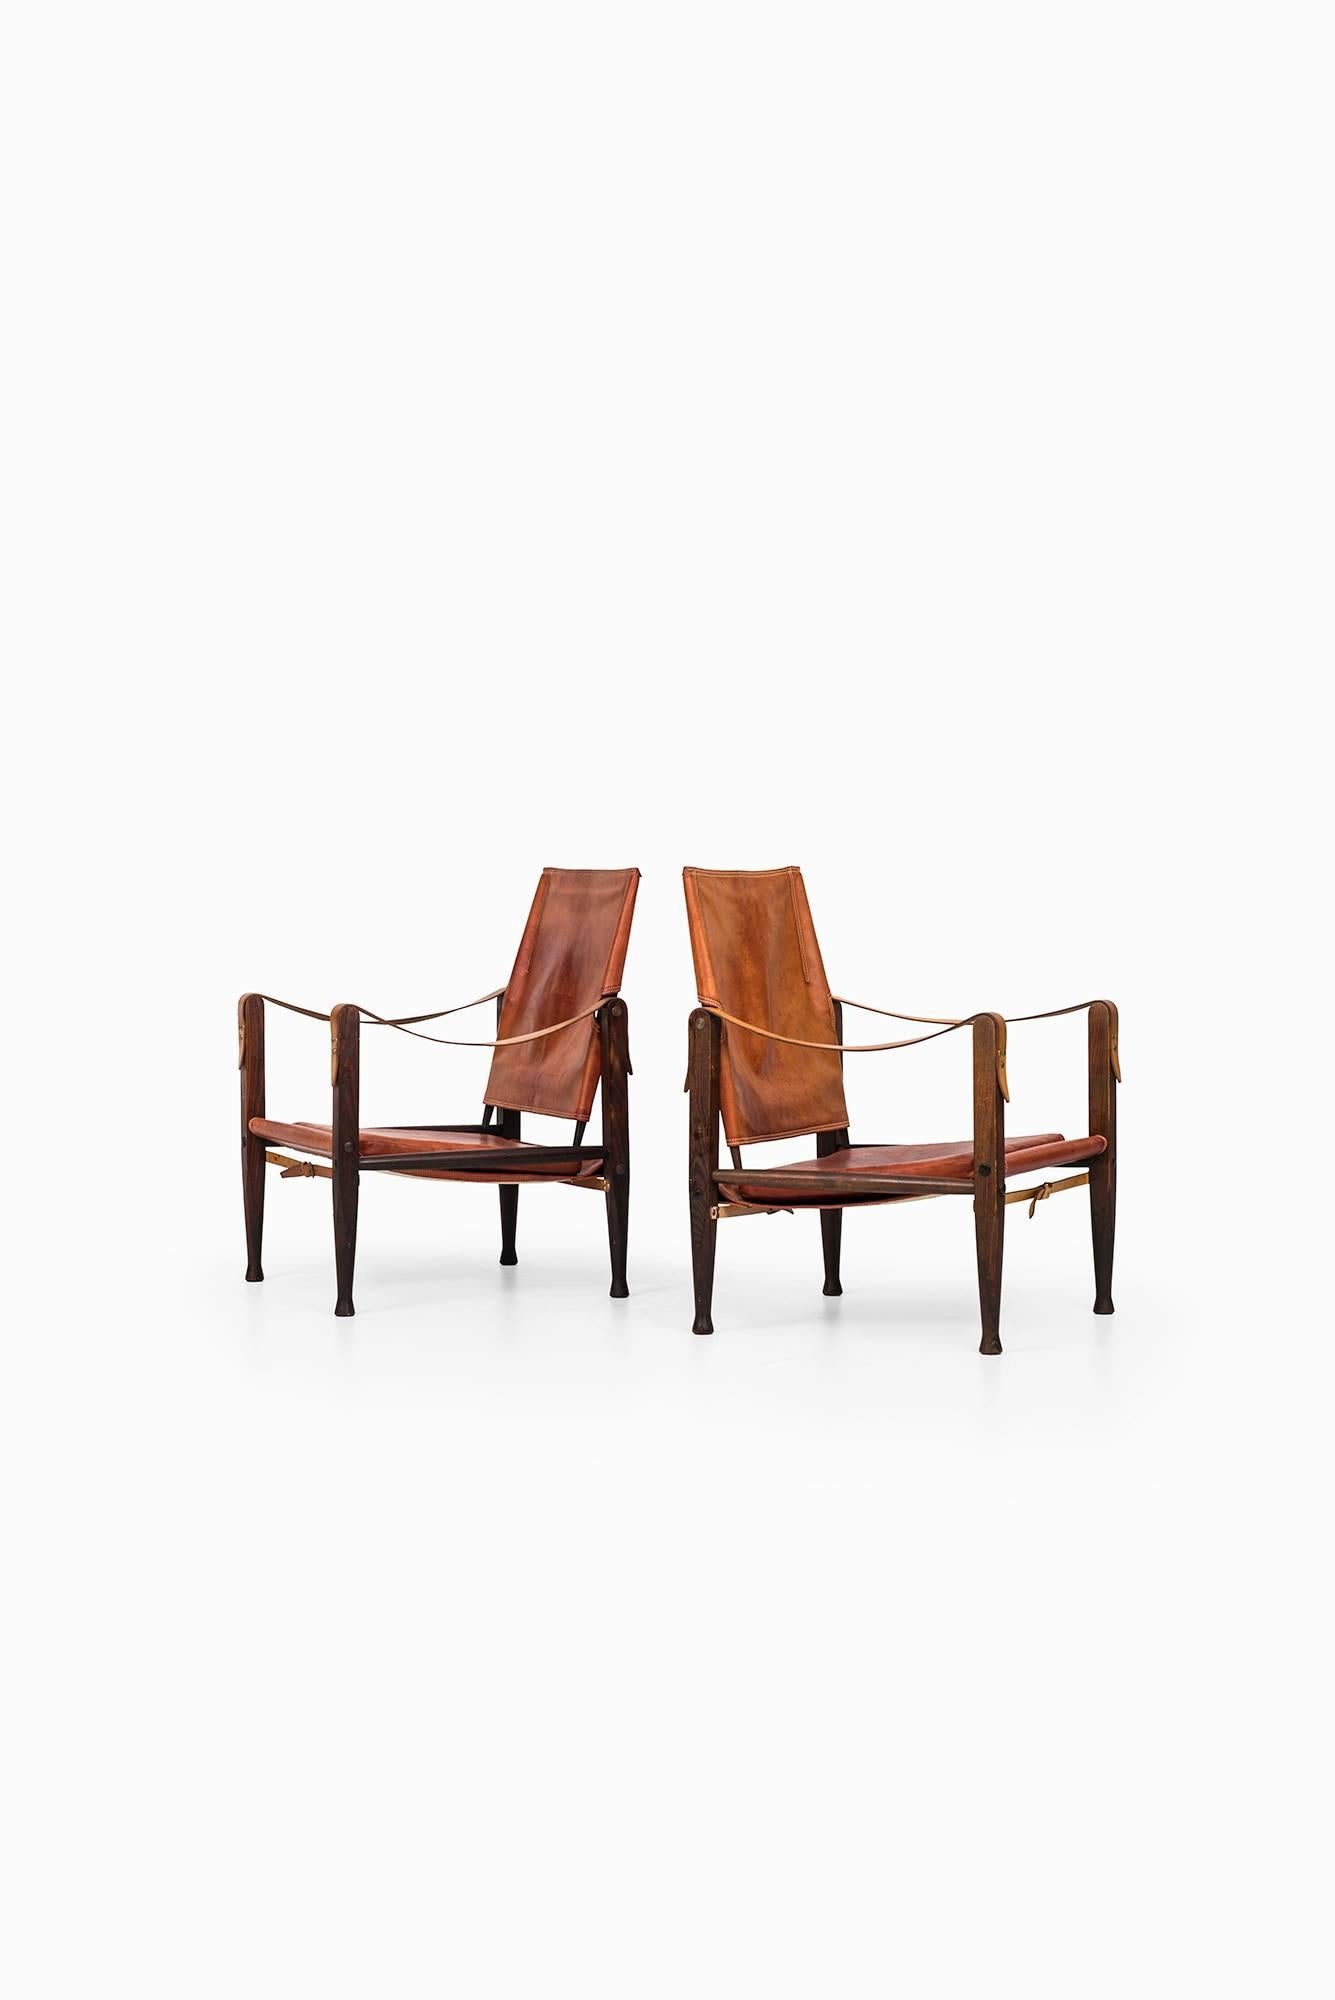 A rare pair of safari chairs designed by Kaare Klint. Produced by Rud Rasmussen in Denmark.